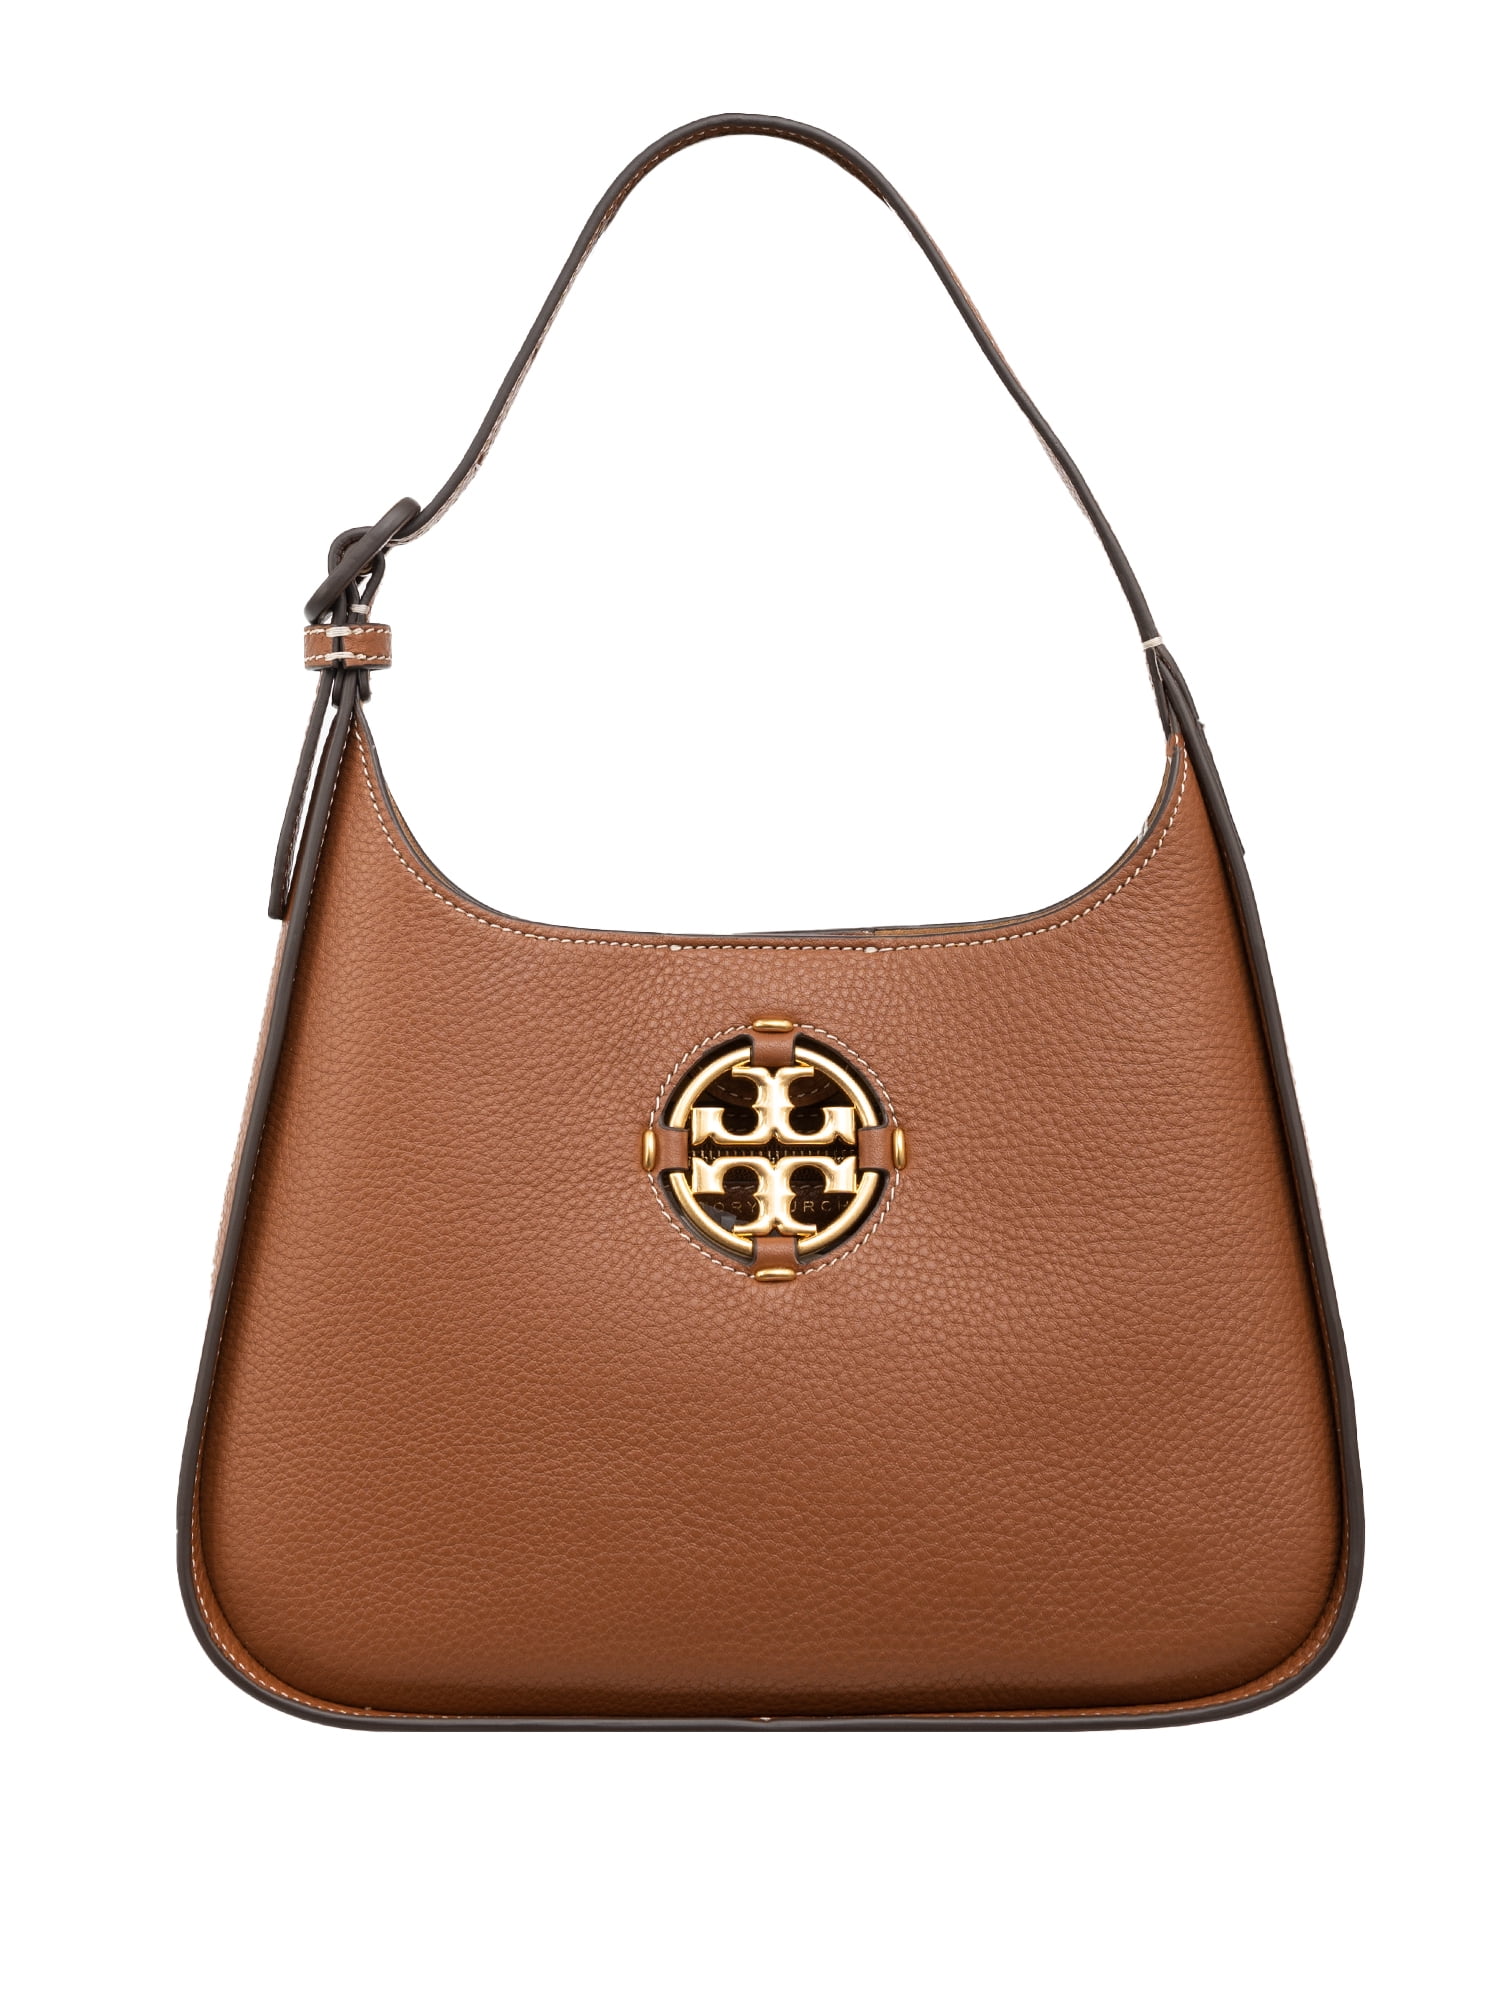 How to spot original Tory Burch. How to avoid fake Tory Burch tote bags and  purses 